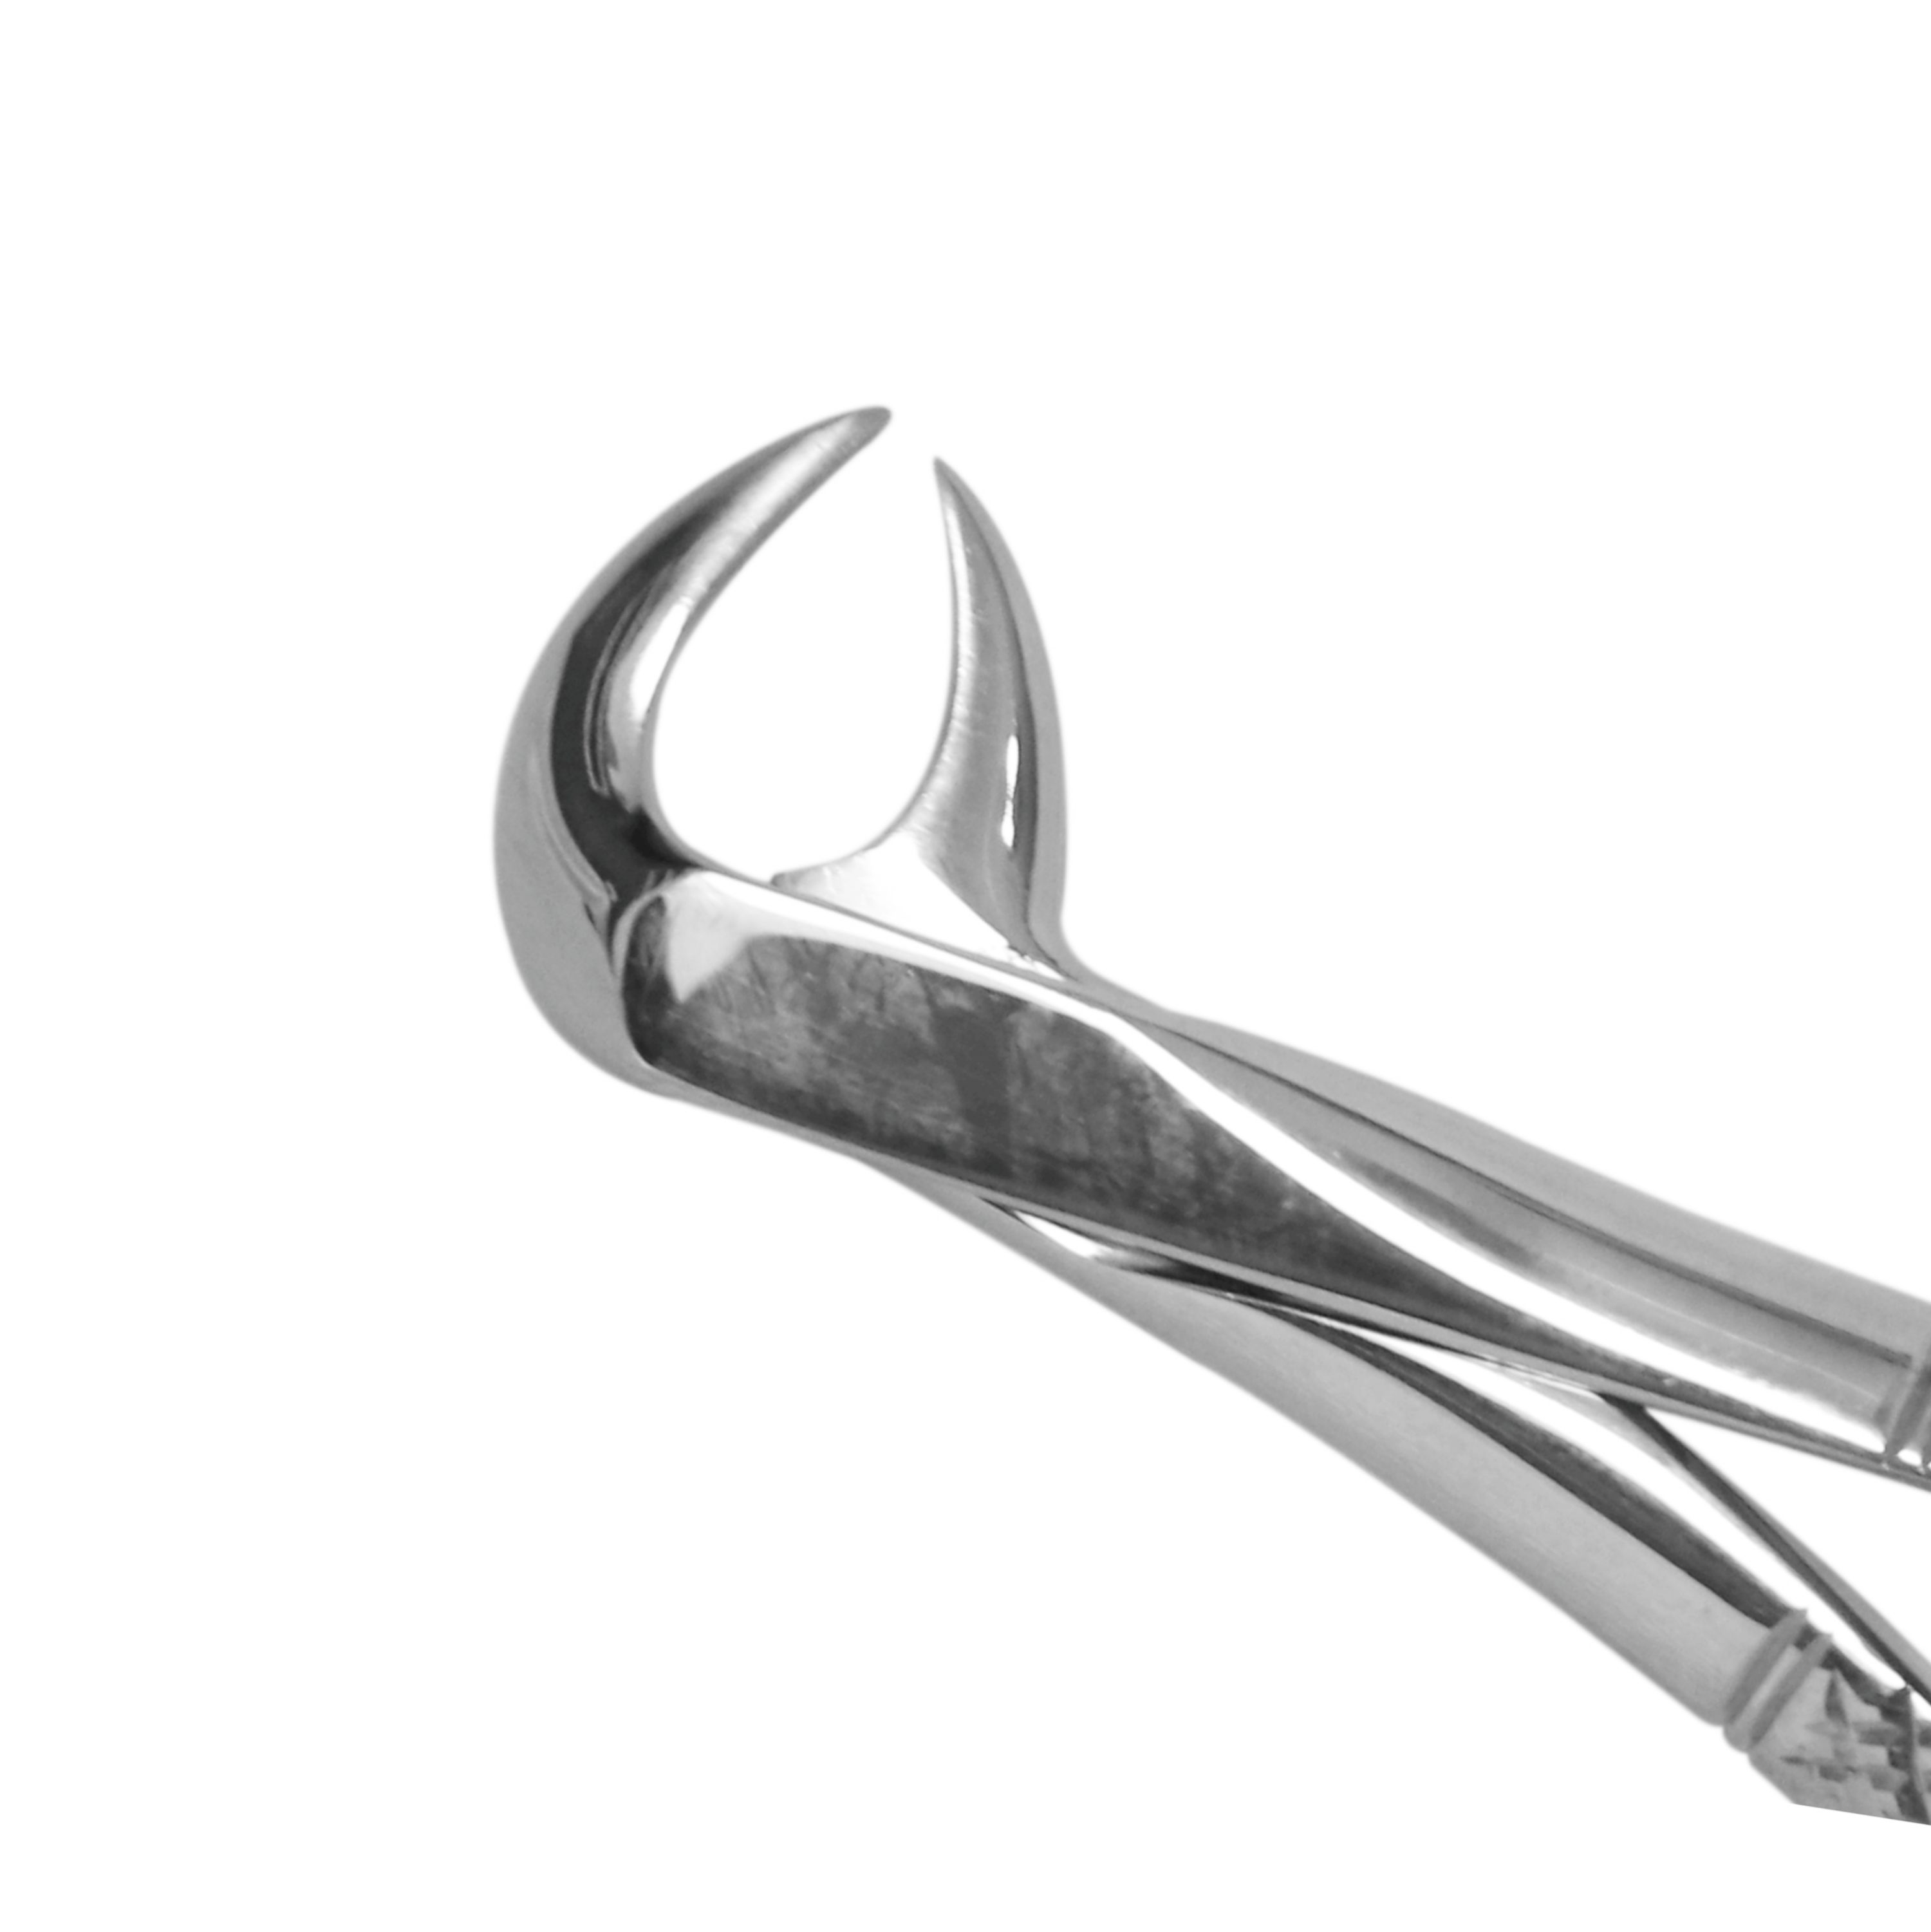 Trust & Care Tooth Extraction Forcep Lower Molars Cow Horn Fig No. 86A Standard